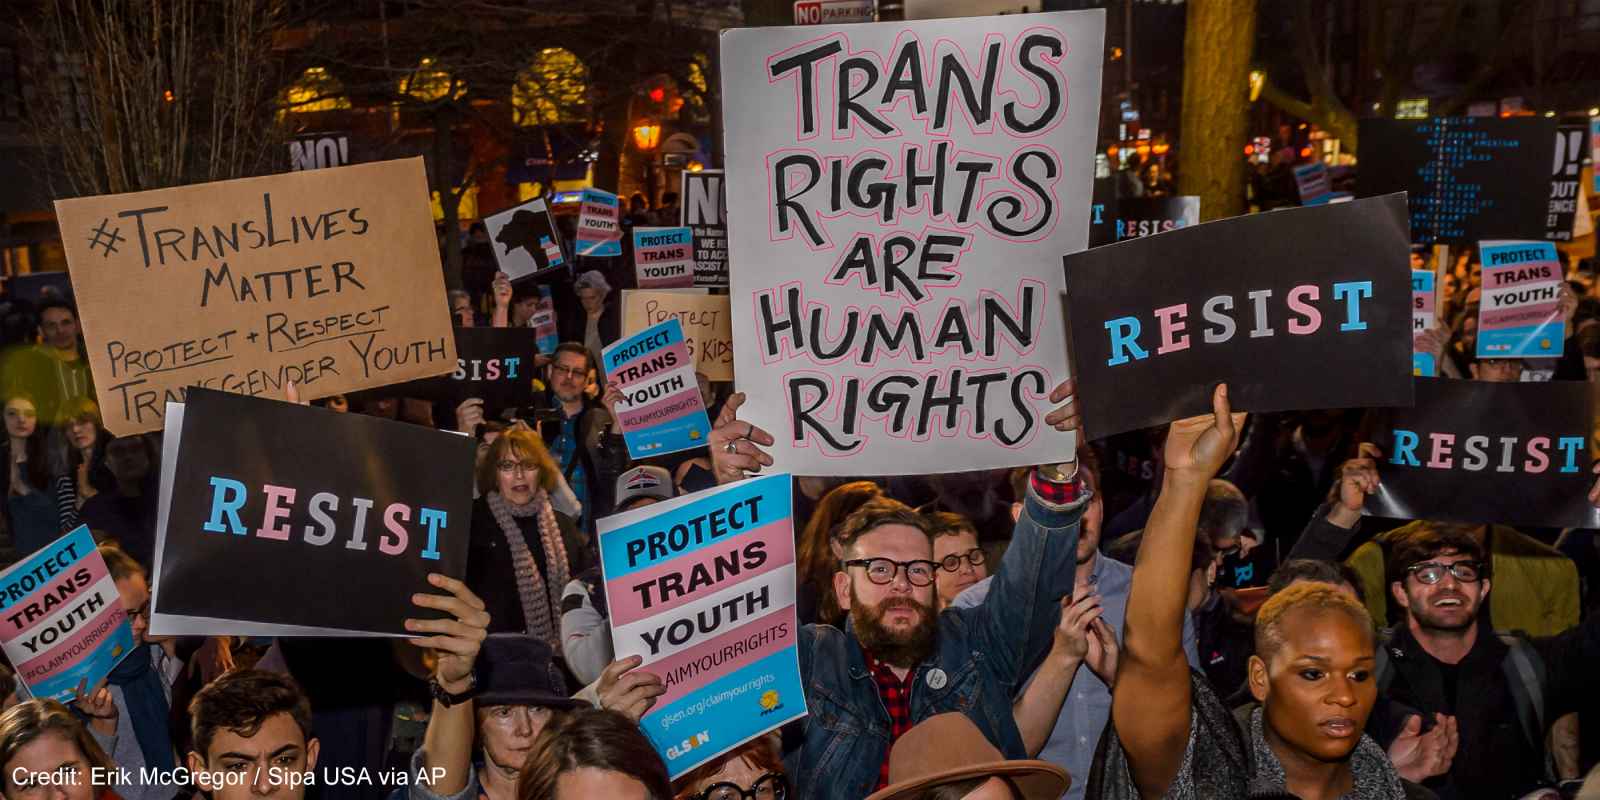 Protestors with signs advocating for the rights of trans youth.